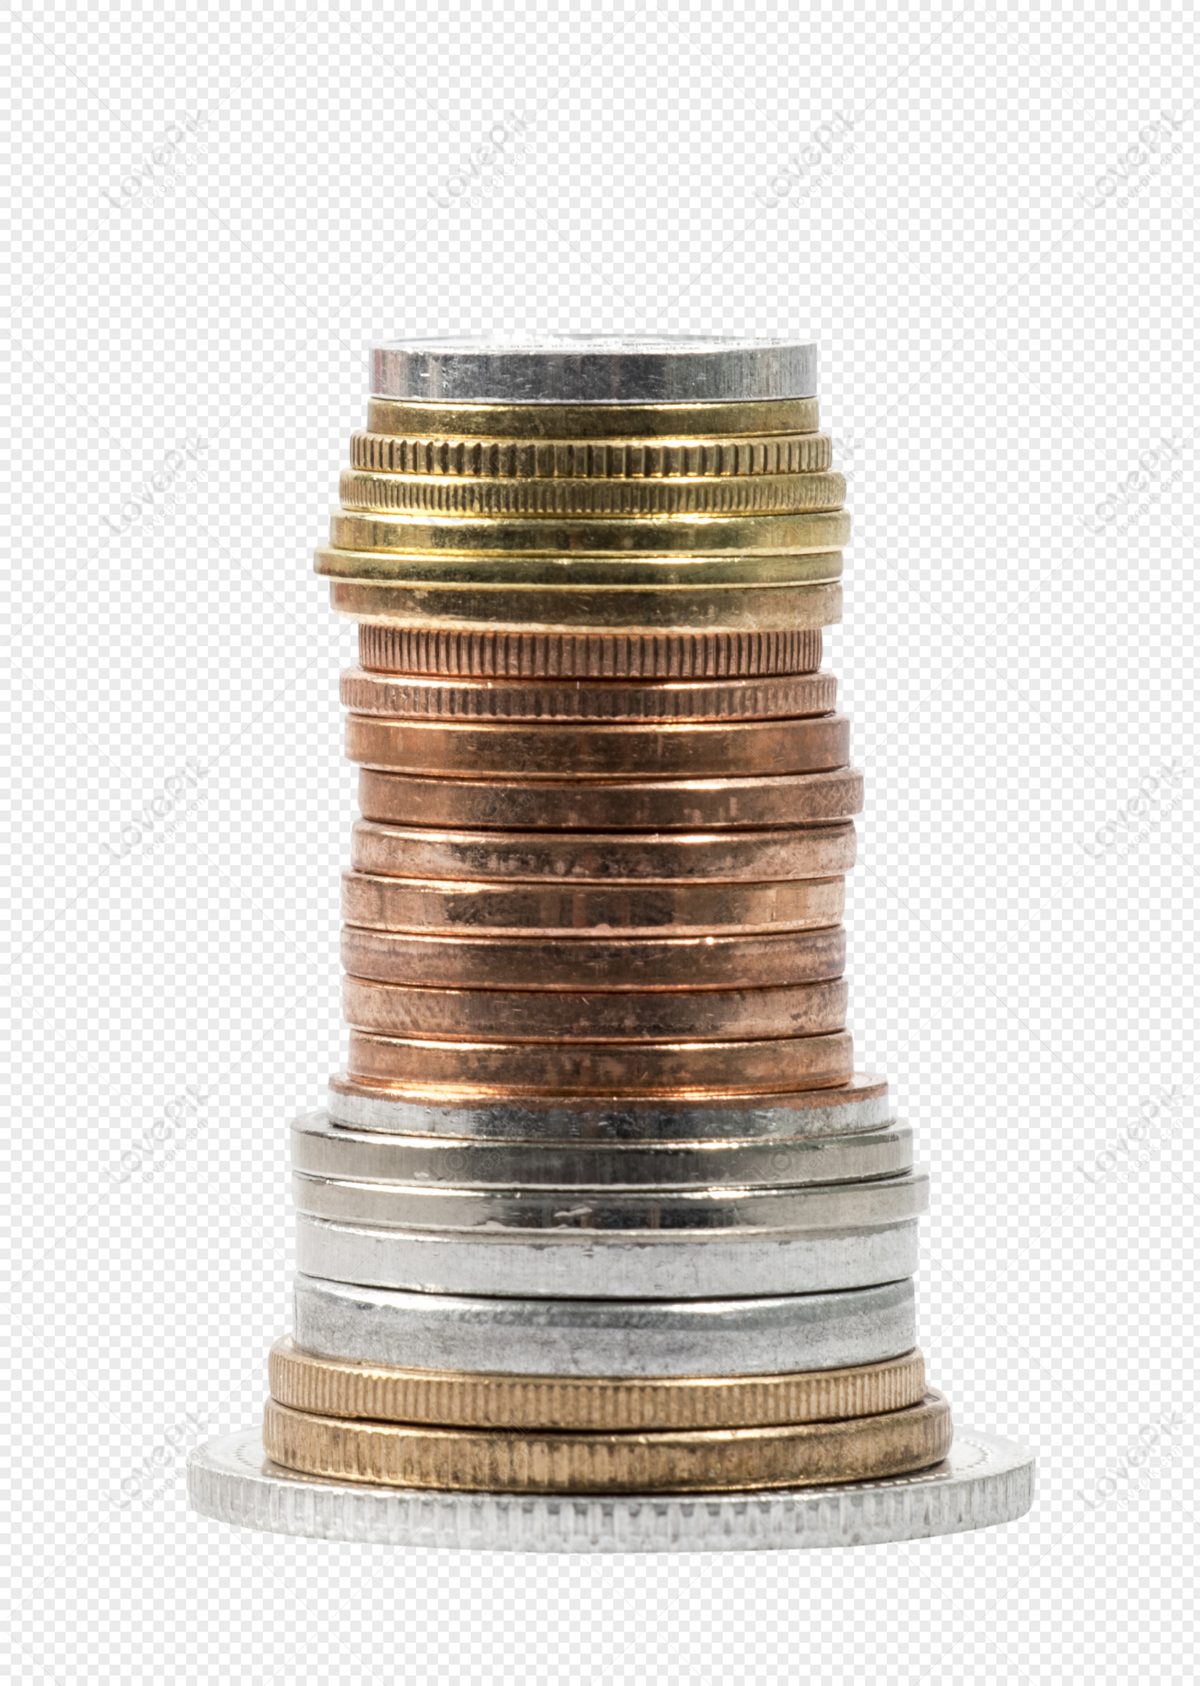 coin stack png